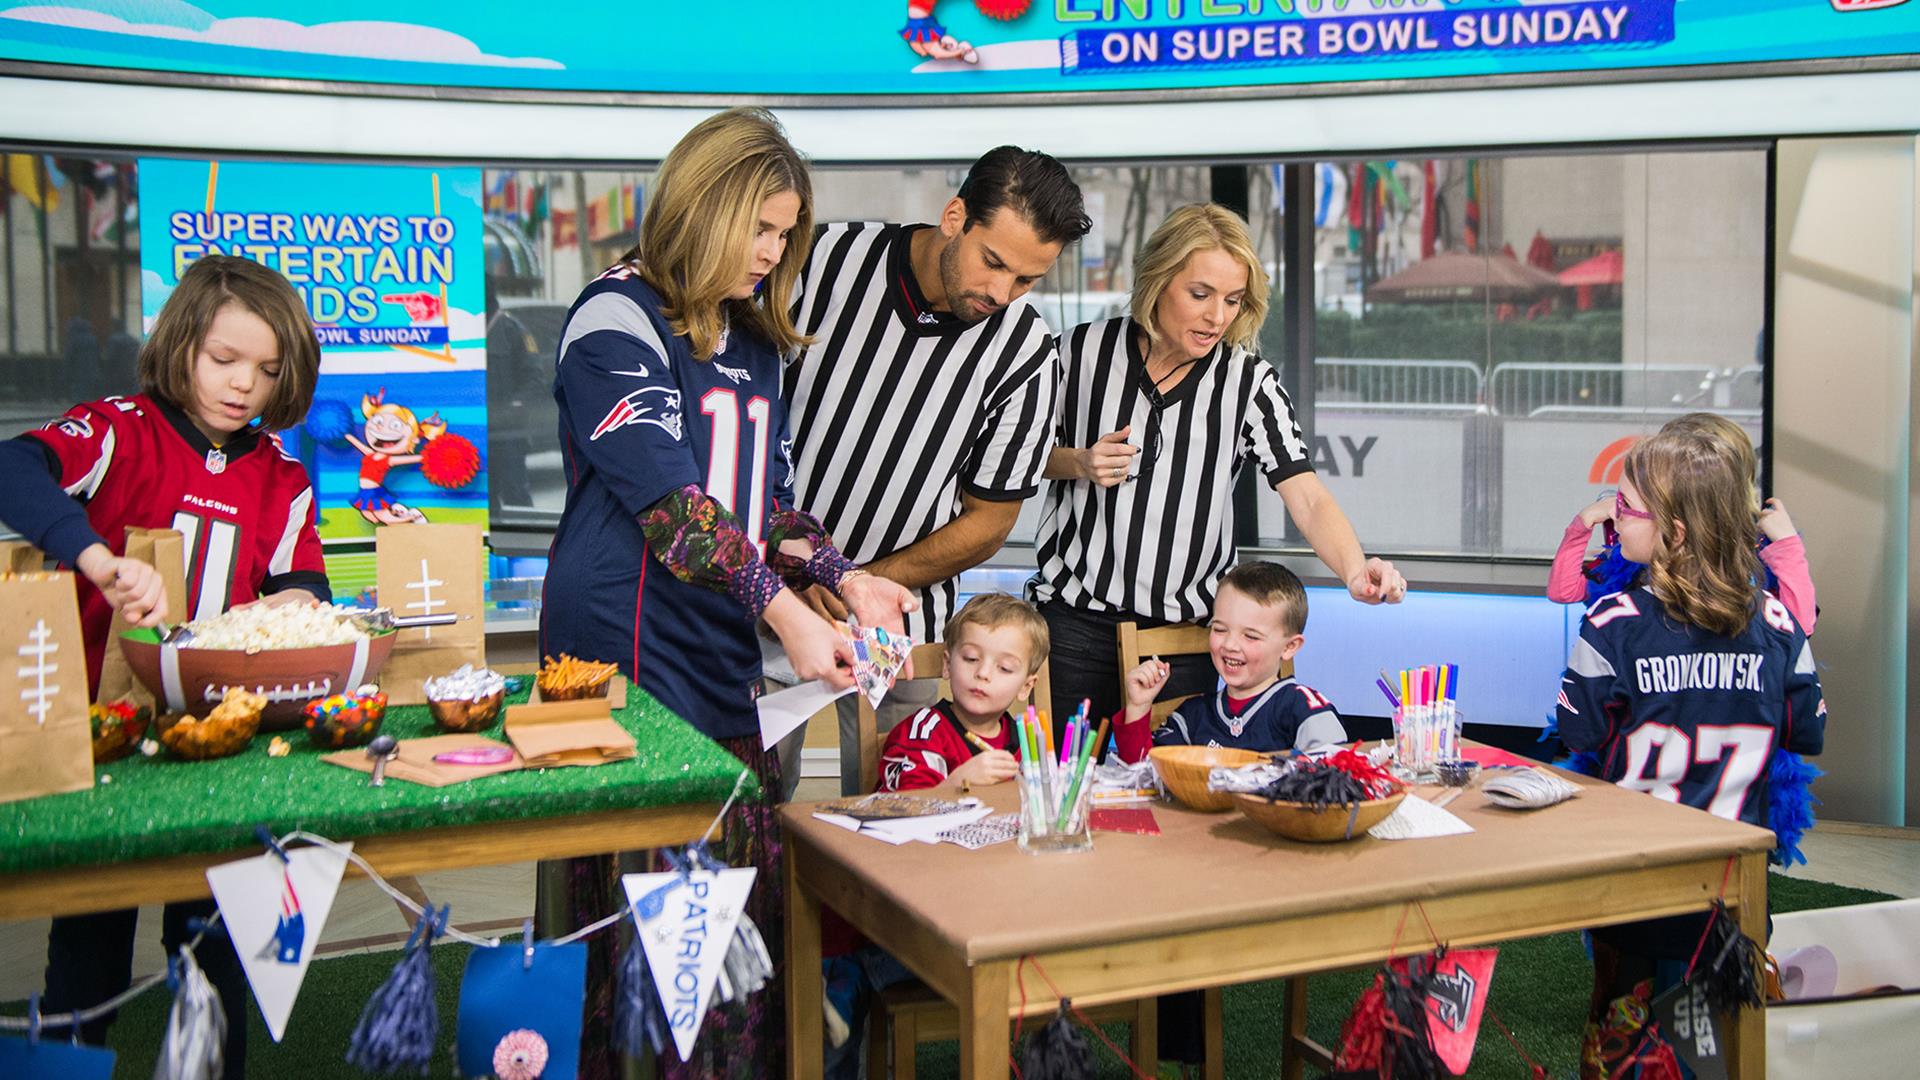 Football-themed treats and other ways to keep kids happy on Super Bowl Sunday